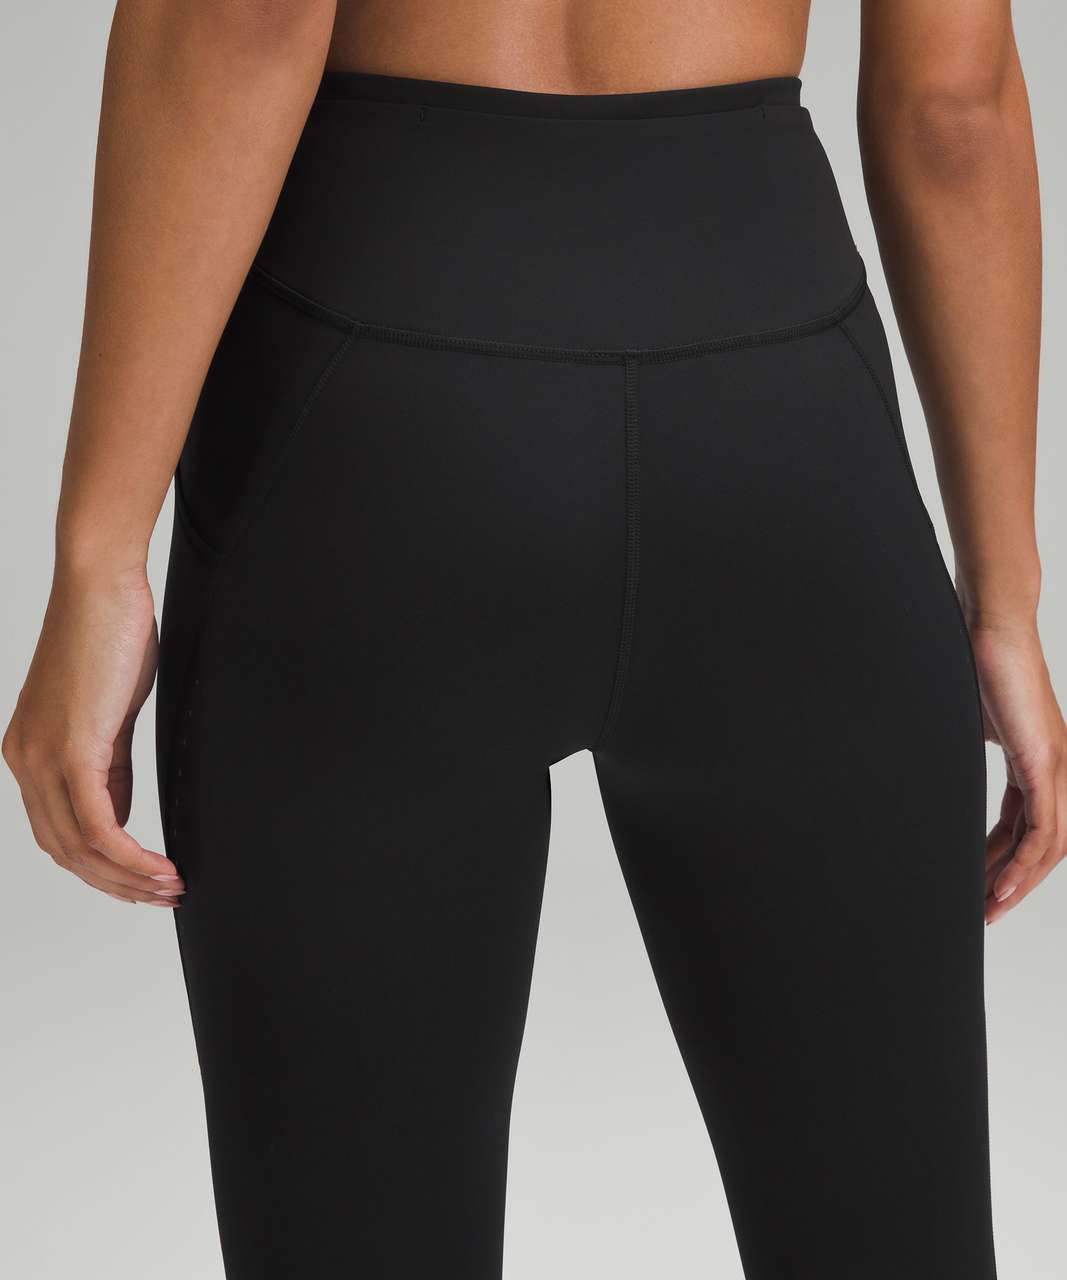 Lululemon Fast and Free High-Rise Tight 25" *Pockets - Black